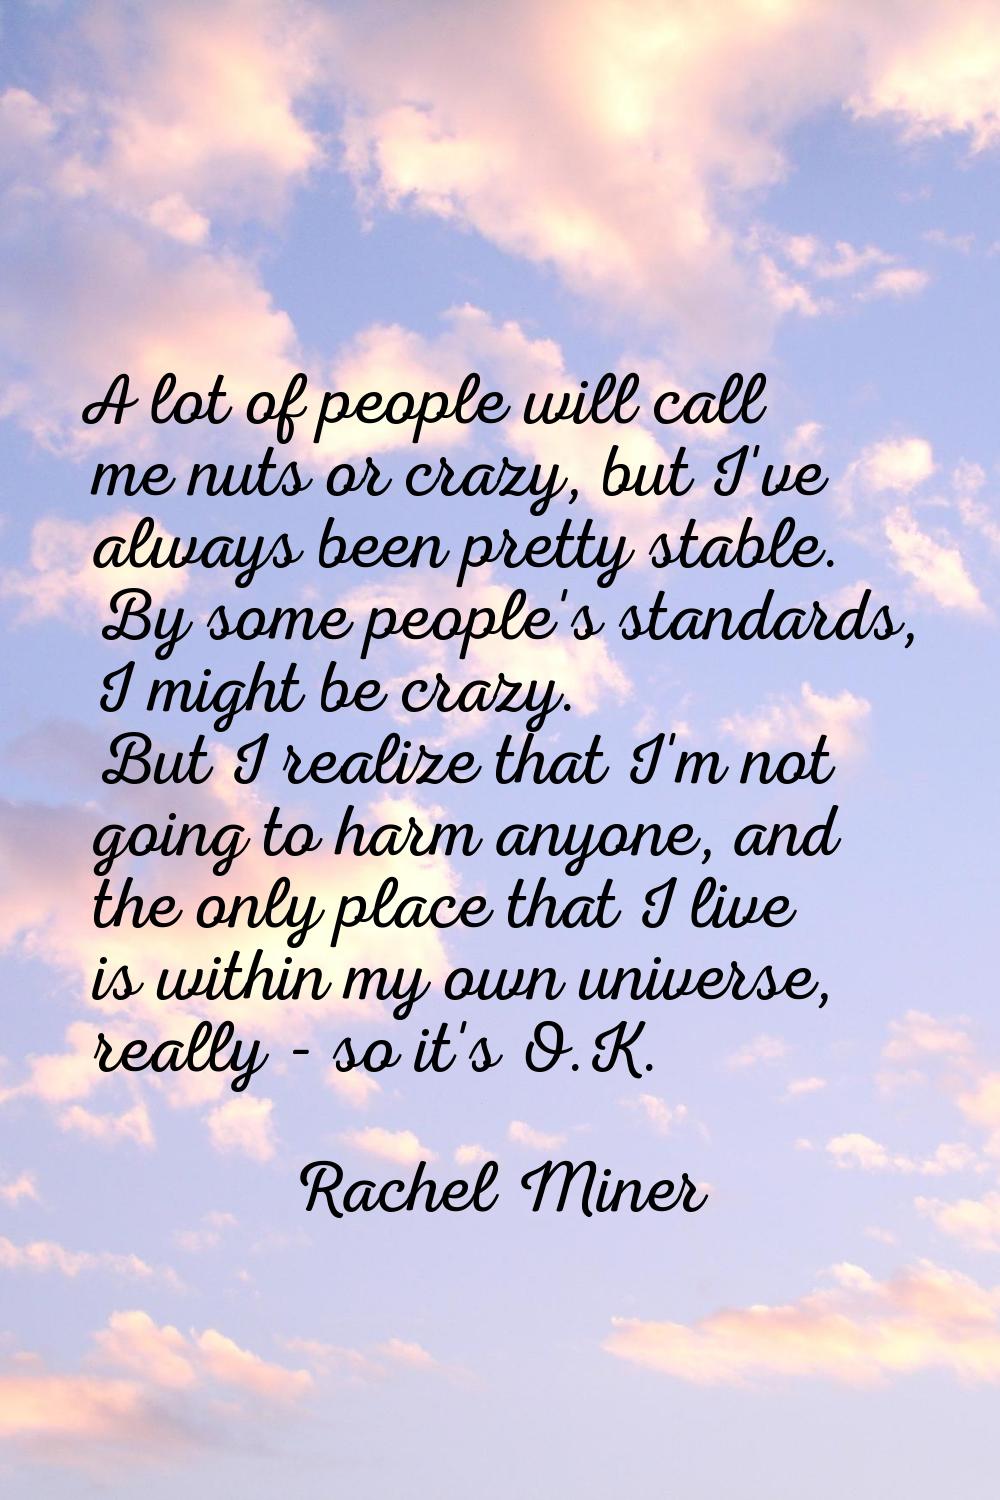 A lot of people will call me nuts or crazy, but I've always been pretty stable. By some people's st